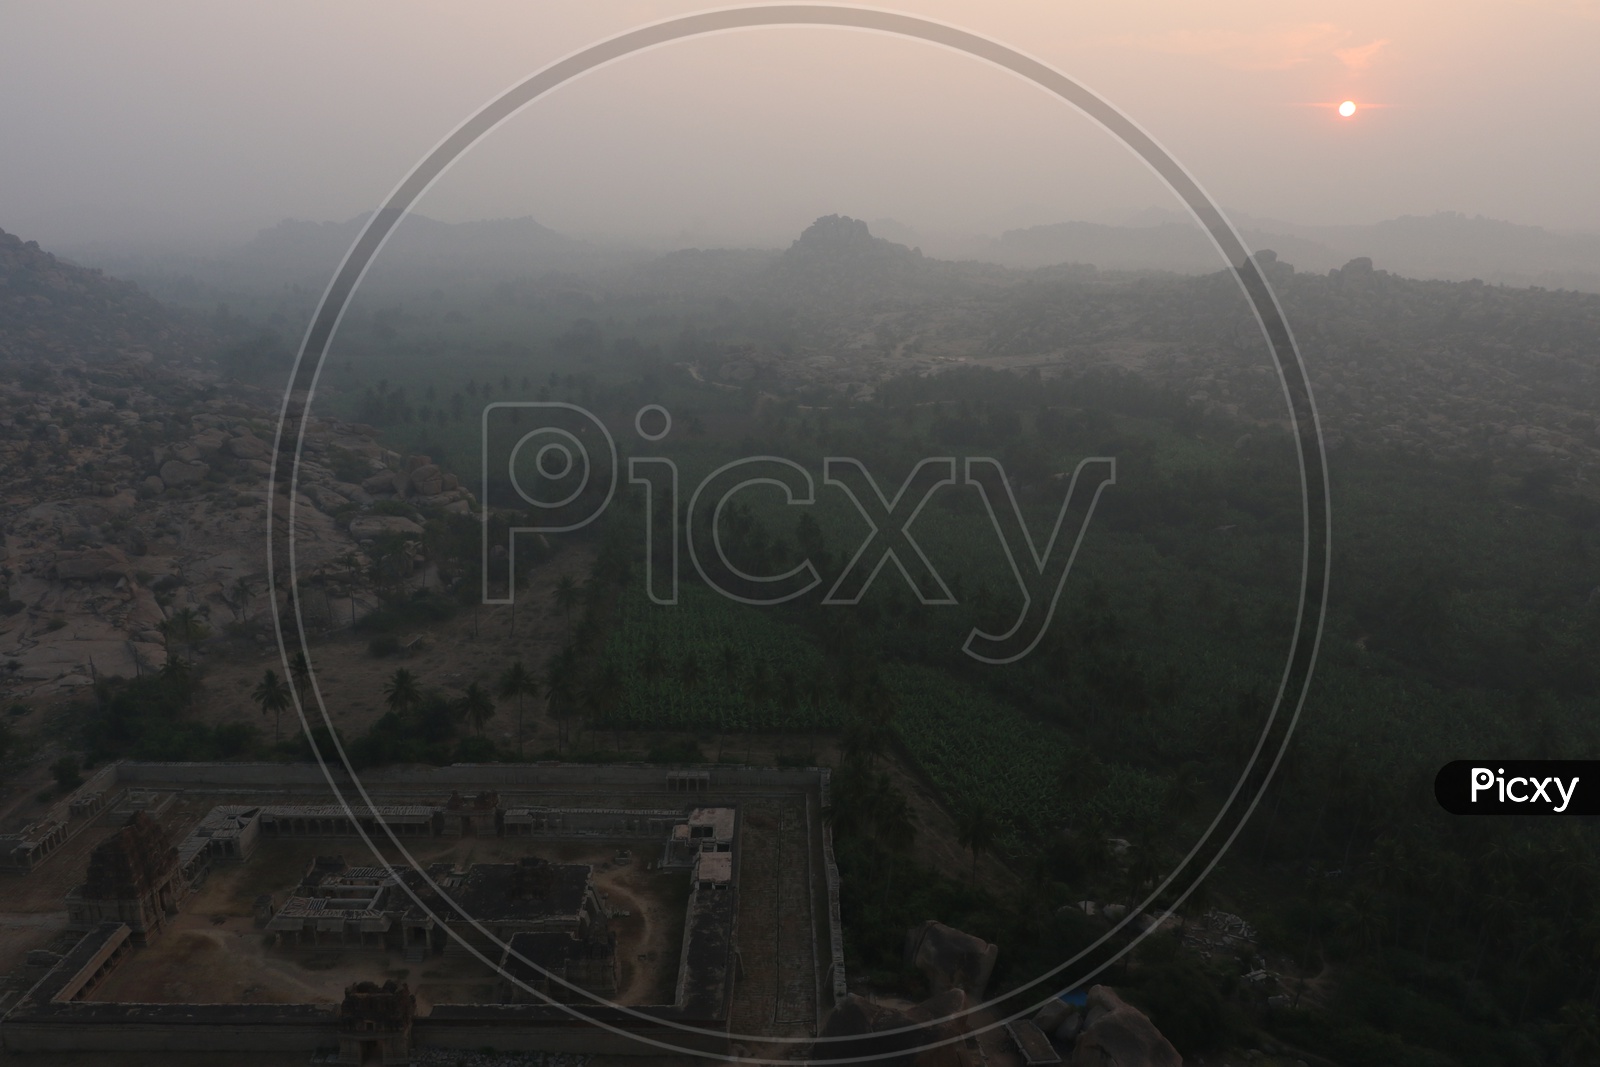 Achyuta Raya Temple in aerial view with sunrise